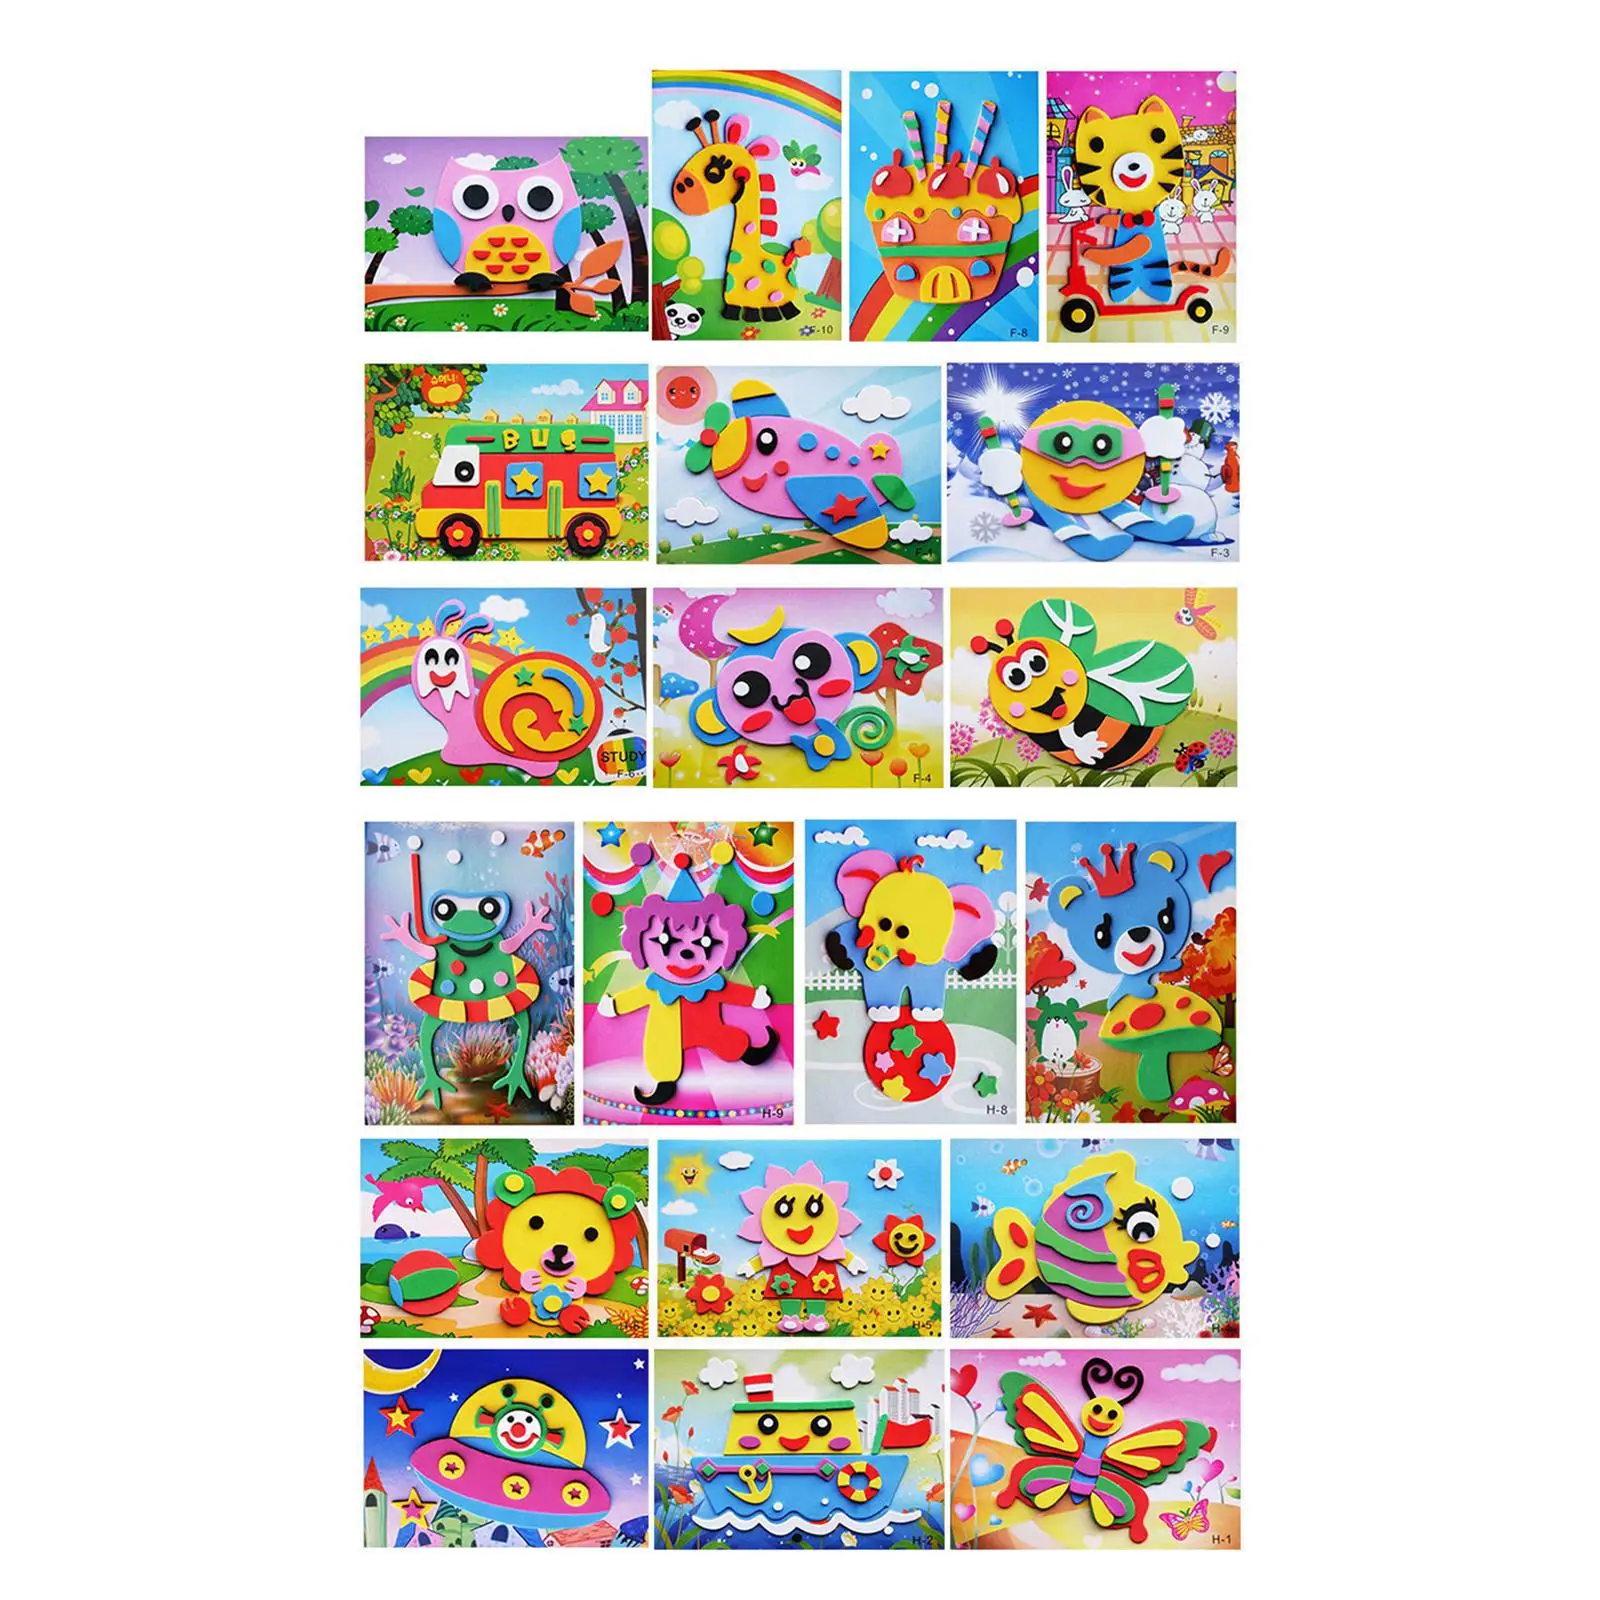 

Self Adhesive Foam Stickers Mixed Colors Kindergarten Child Brain Game for Kids Toddler Greeting Cards Making Crafts